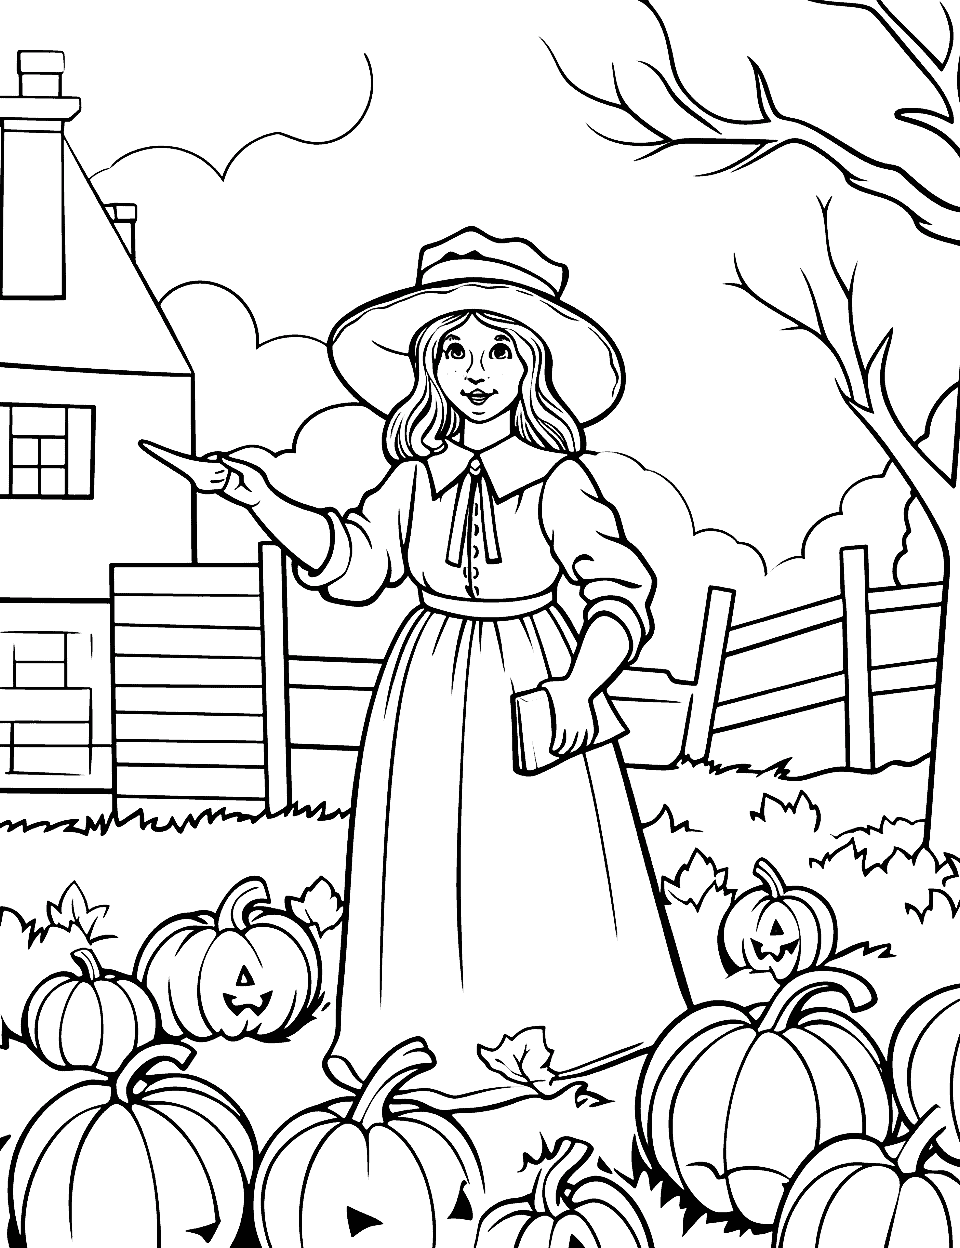 Witch in Pumpkin Field Halloween Coloring Page - A scene of a witch in a pumpkin field, perfect for older kids learning about history.